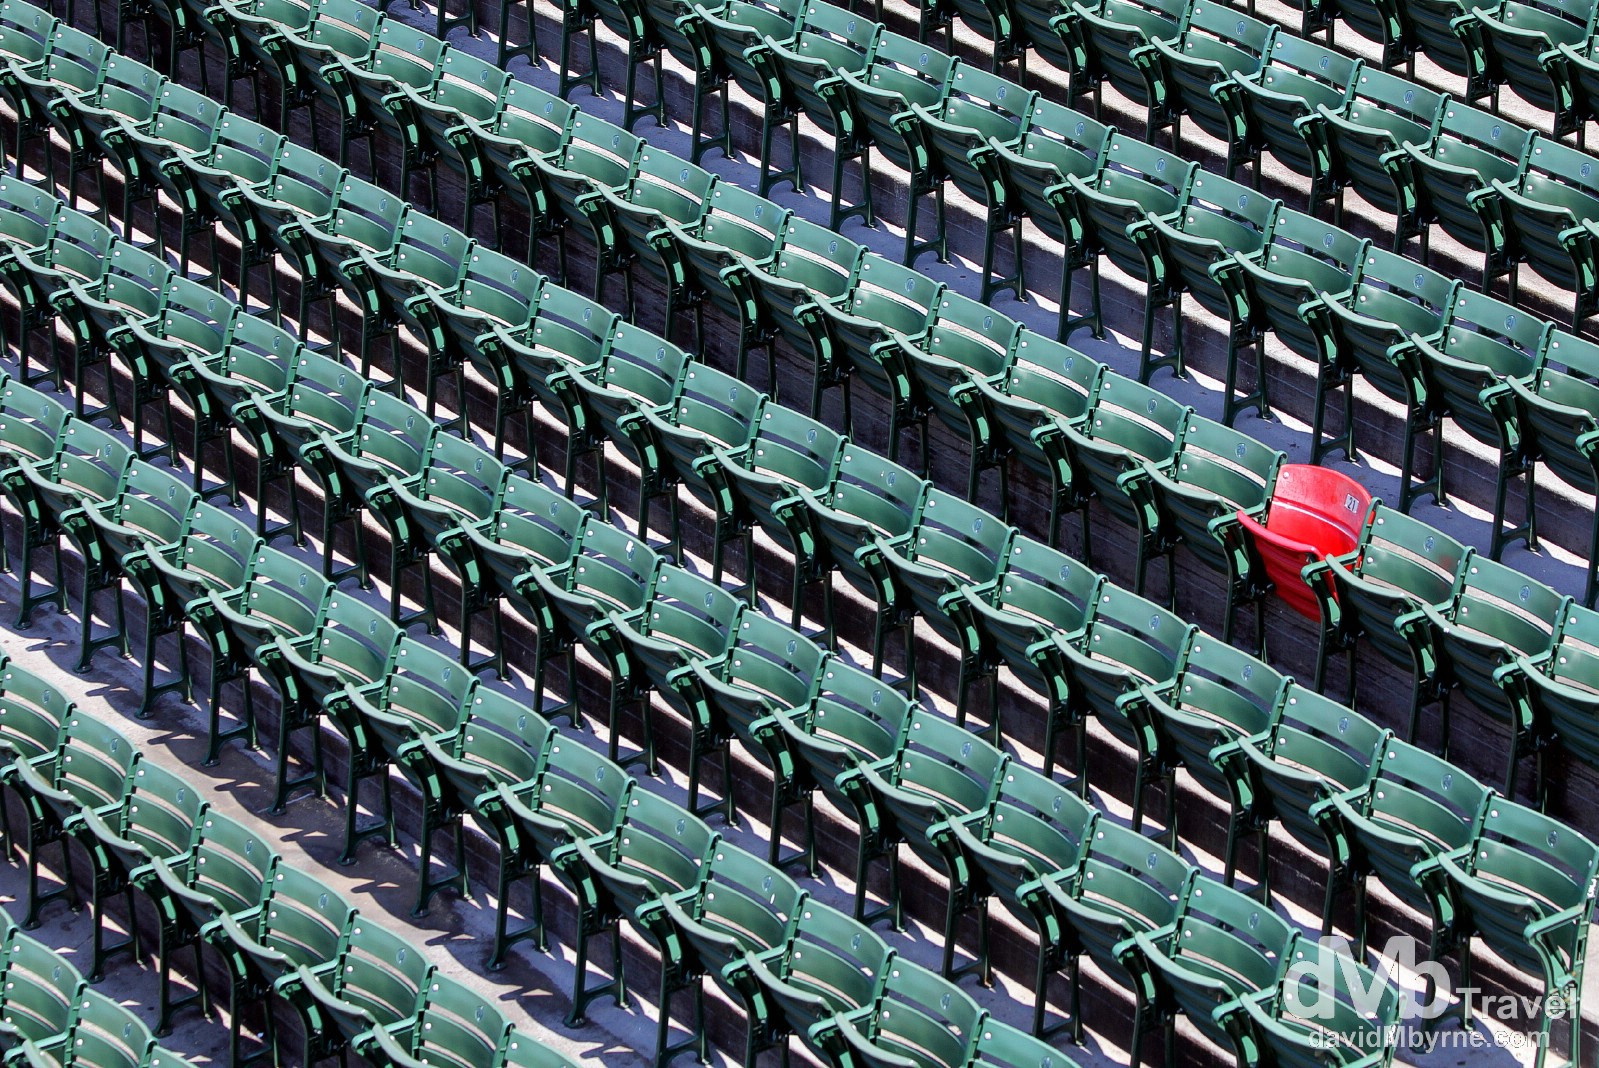 The Ted Williams red seat stands out amongst a see of green in the right field bleacher section of Fenway Park. Many baseball greats have played for the Red Sox, among them Babe Ruth, Carl Yastrzemski, & Ted Williams. On June 9, 1946, Williams hit a 502-foot homerun, the longest ever hit into the Fenway bleachers. The seat, located in section 42, row 37, seat 21, was painted red, one of only 2 in Fenway, to commemorate Williams' titanic blast, although at the time of the home run the bleachers were real bleachers and not individual seats. Fenway Park, Fenway, Boston, Massachusetts, USA. July 17th 2013.